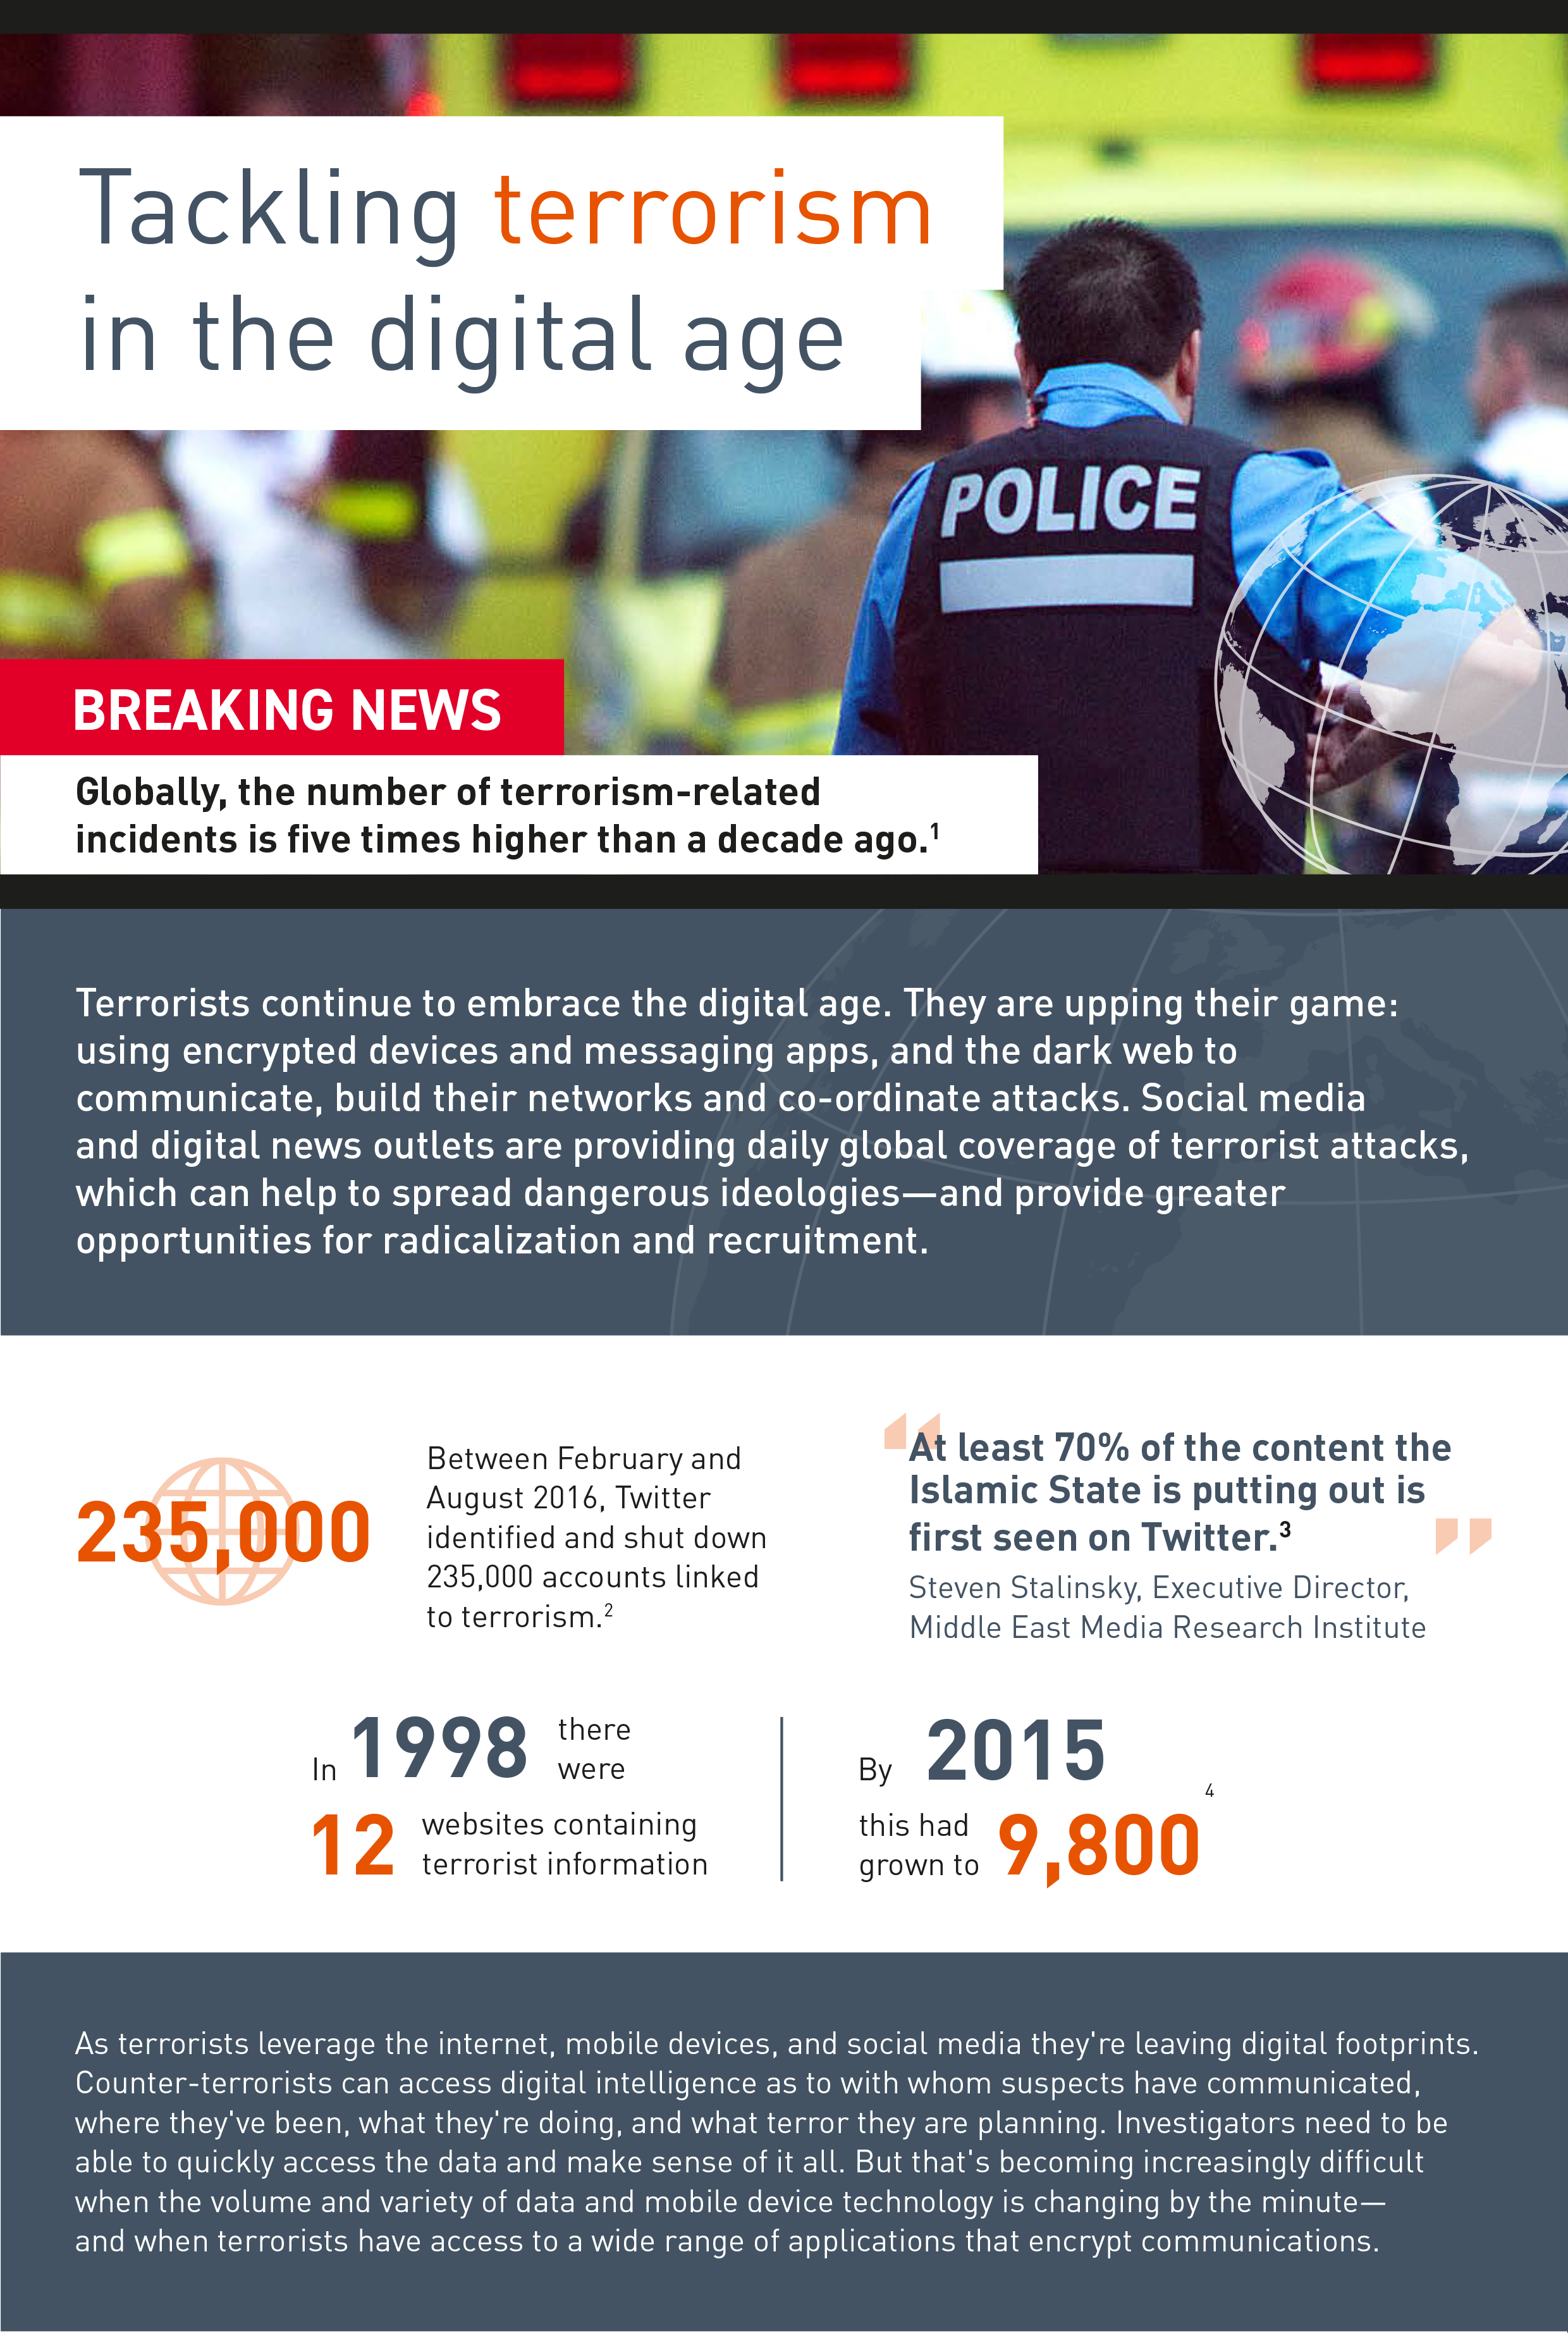 Excerpt from tackling terrorism in the digital age infographic